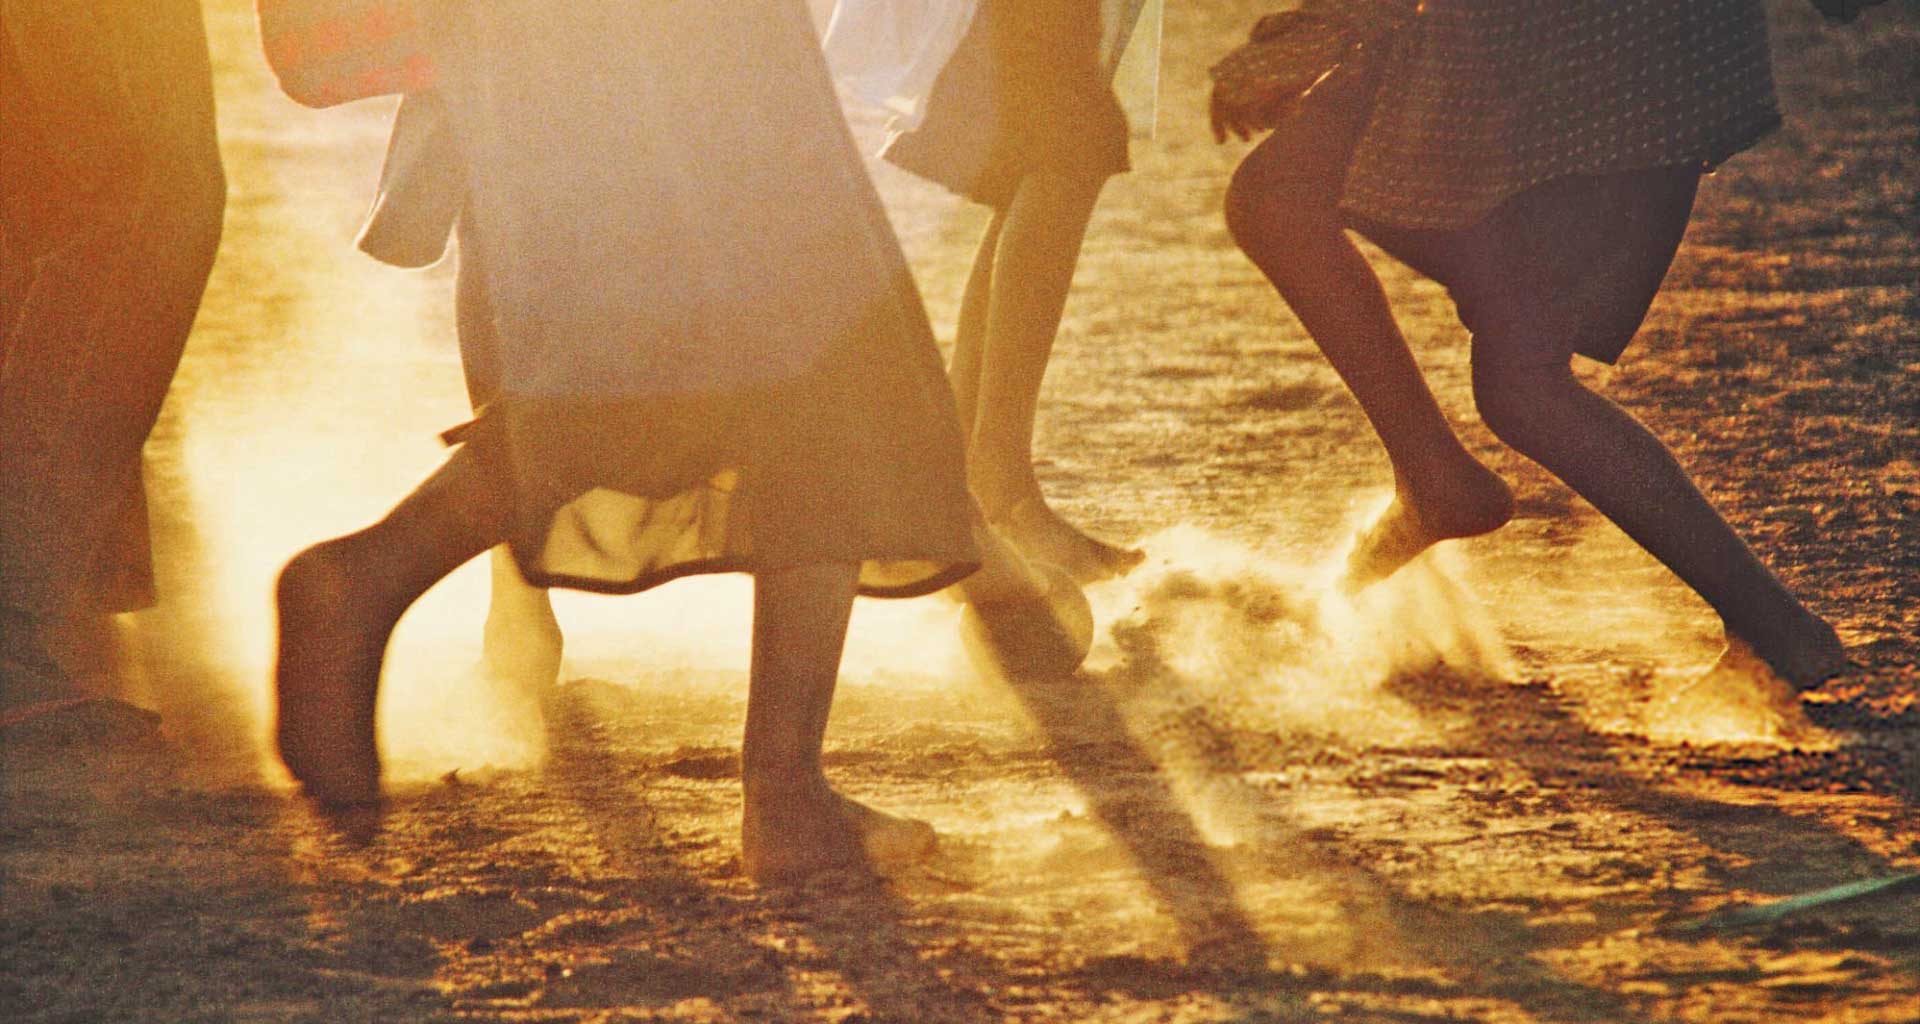 Feet of African Children at Sunset - Importance of Cultural Identity in Building Communities